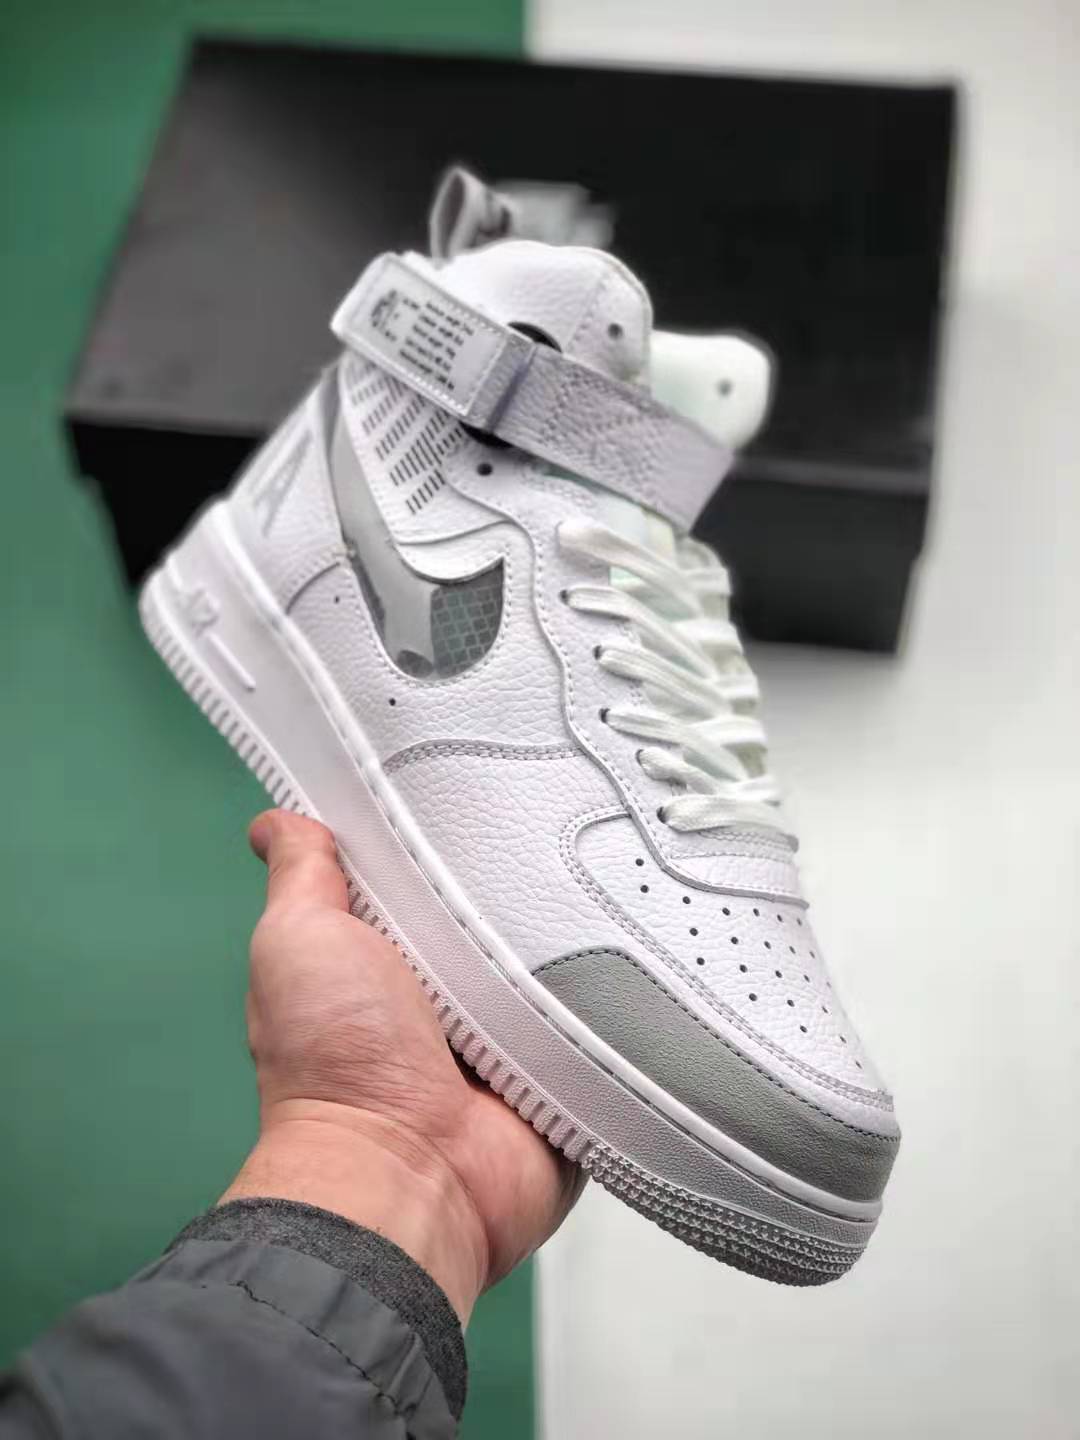 Nike Air Force 1 High 'Under Construction - White' CQ0449-100 - Iconic Style with Aesthetic Appeal